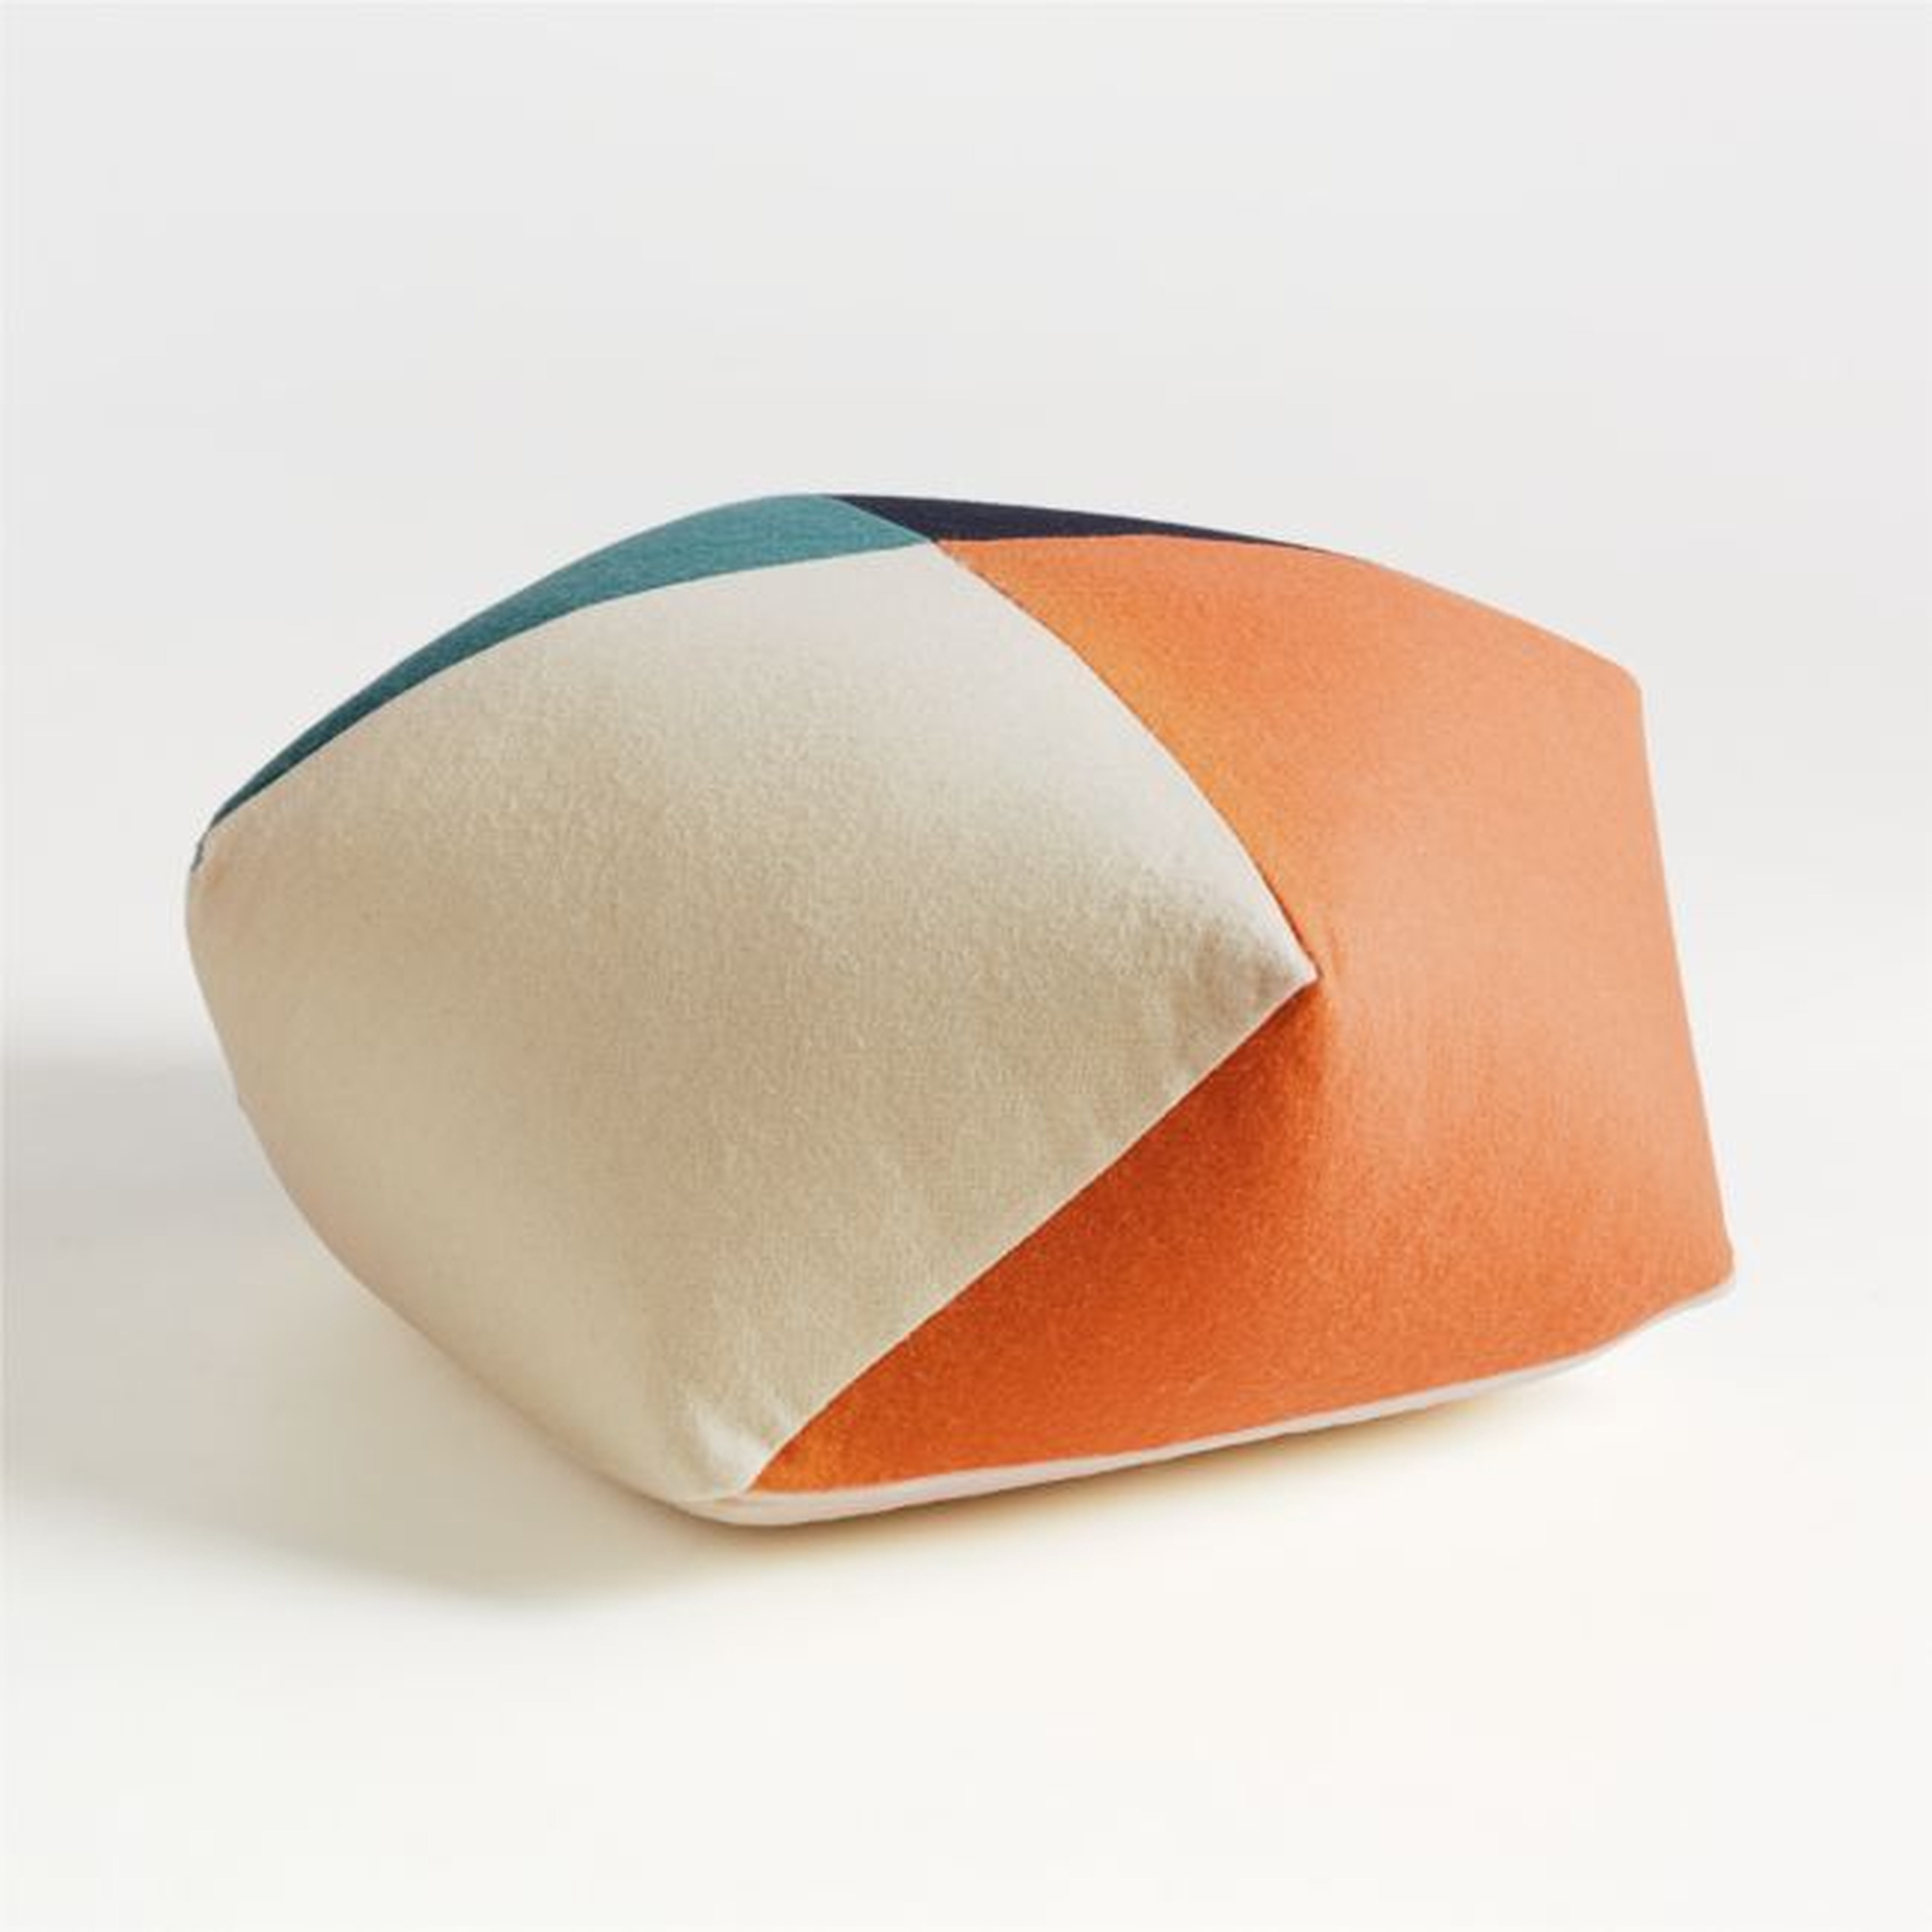 Blue and Orange Pentagon Pouf - Crate and Barrel